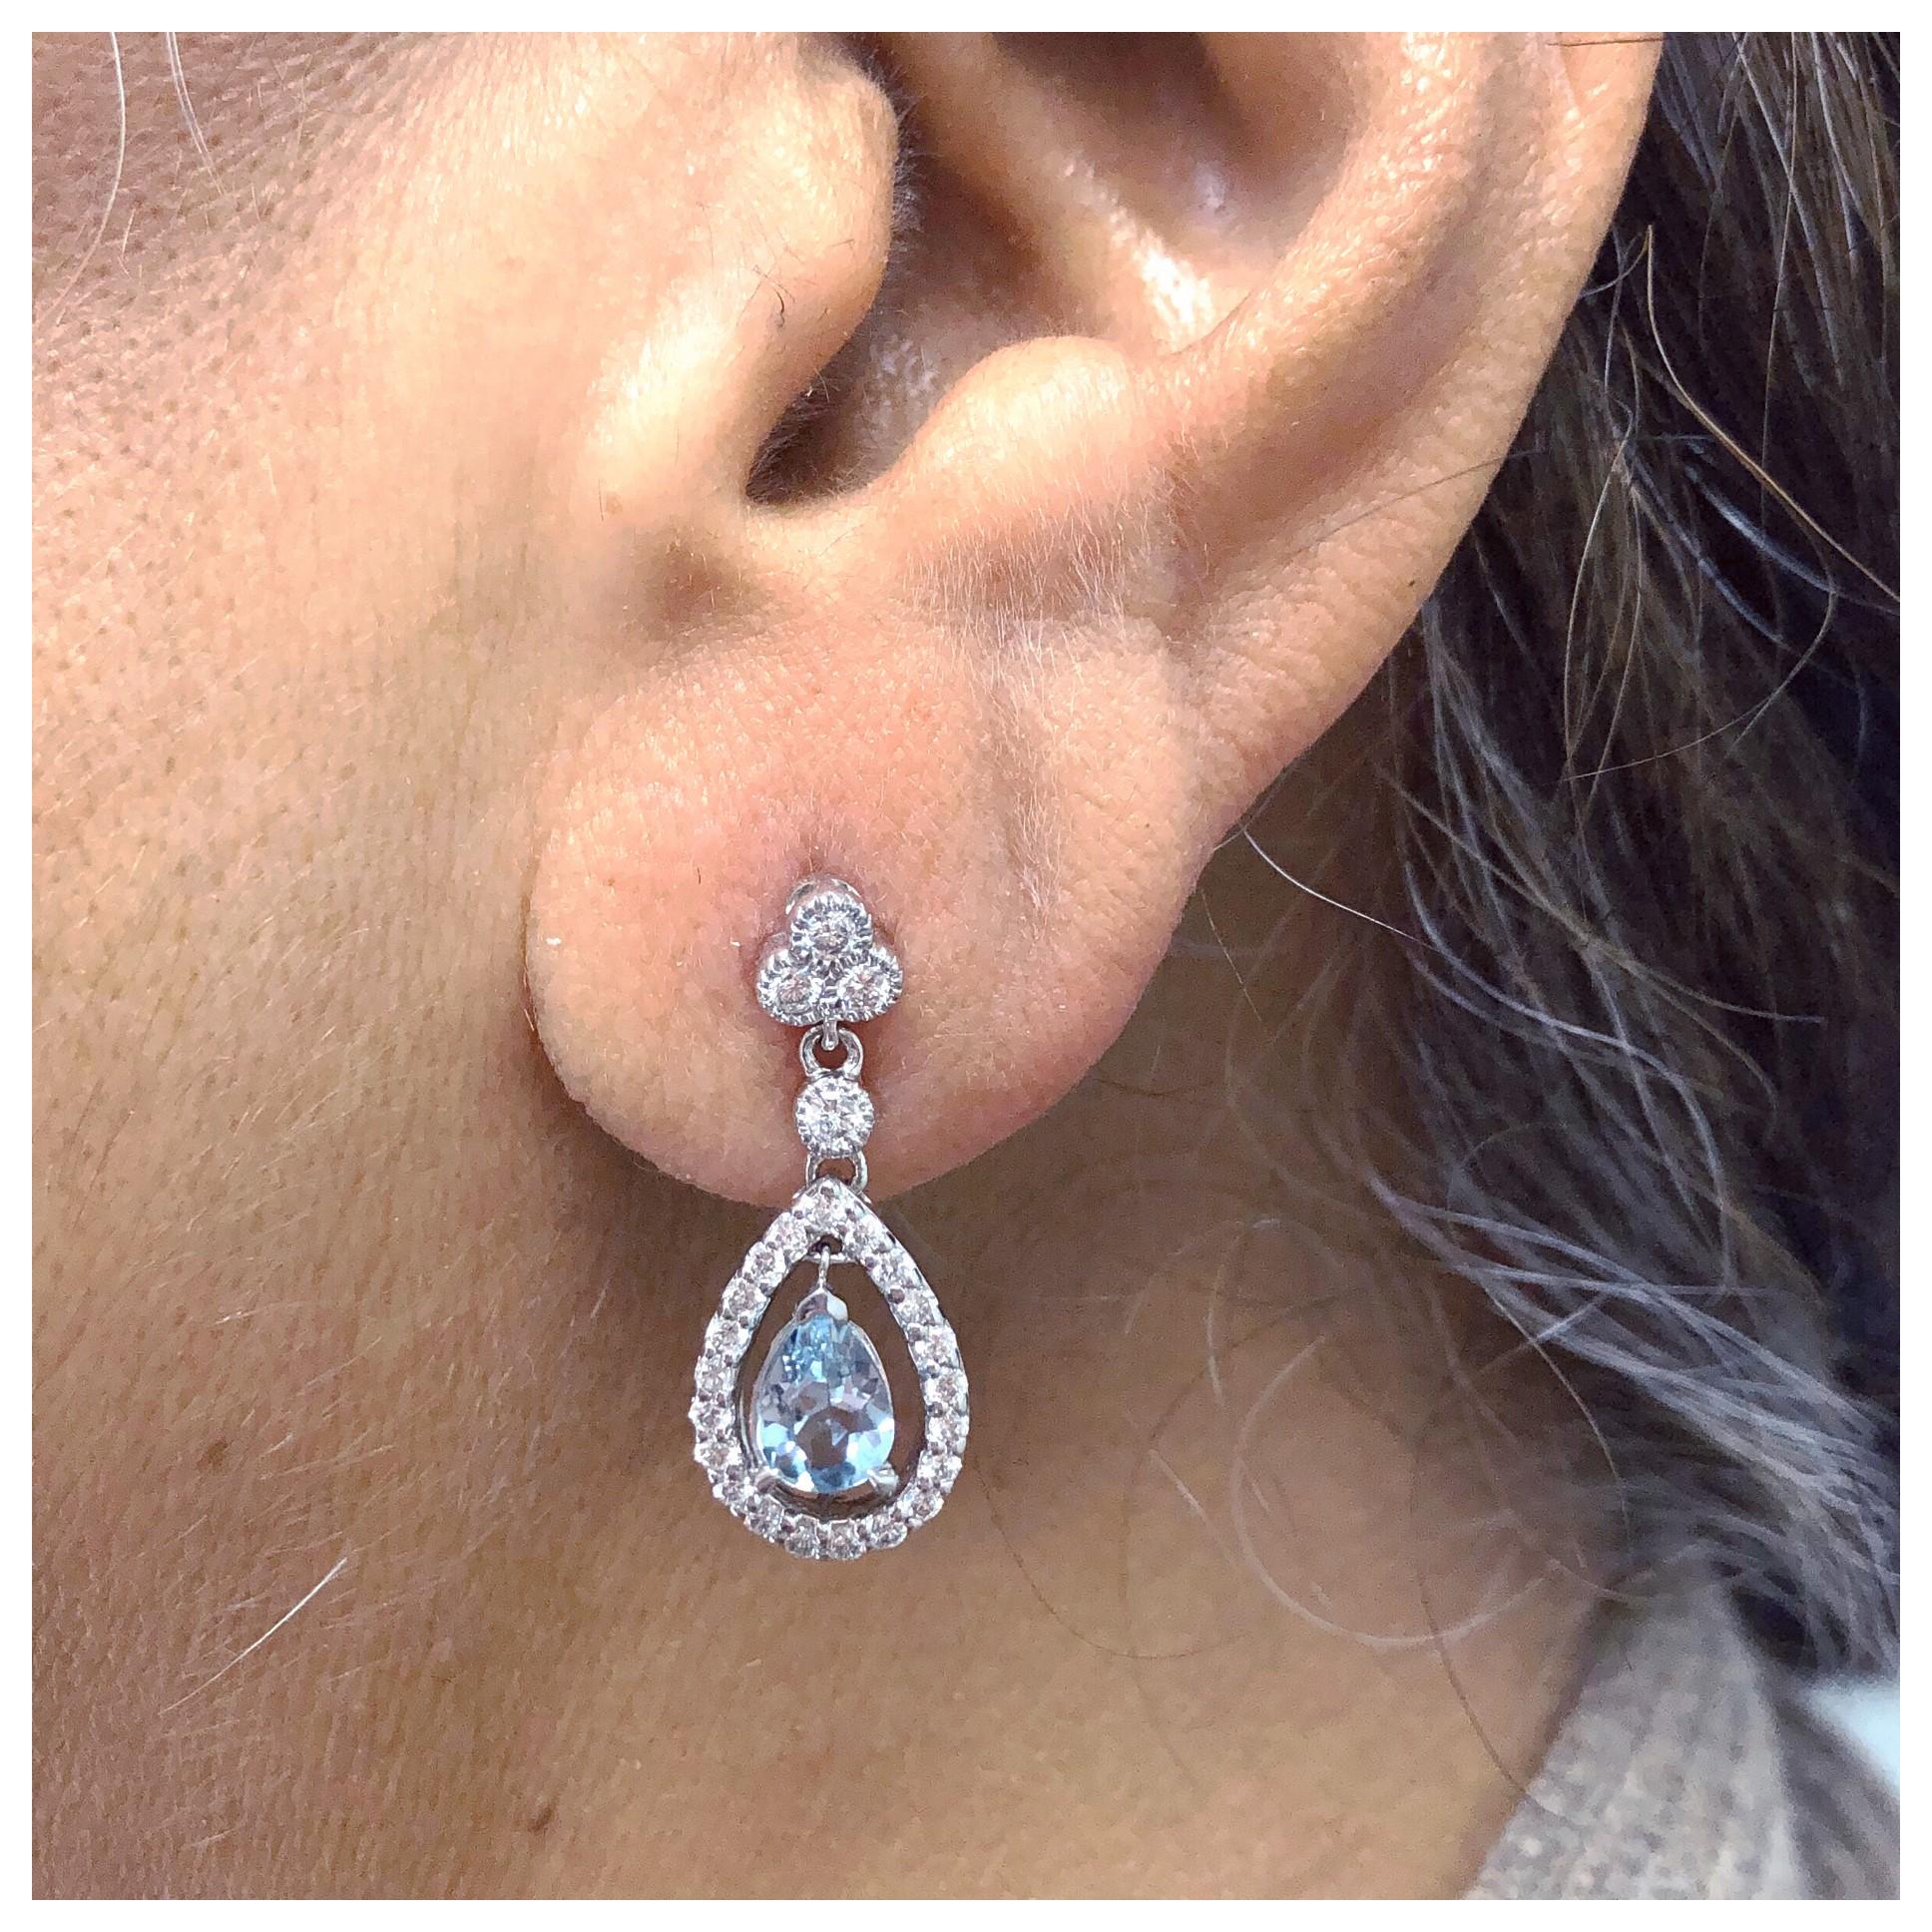 Beautiful vintage inspired 1.16ct. total weight of Aquamarine pear shapes, and .83ct total weight of G color SI clarity diamond melee. These drop earrings are made in 14kt white and are approximately 1 inch tall. We would be happy to work with you